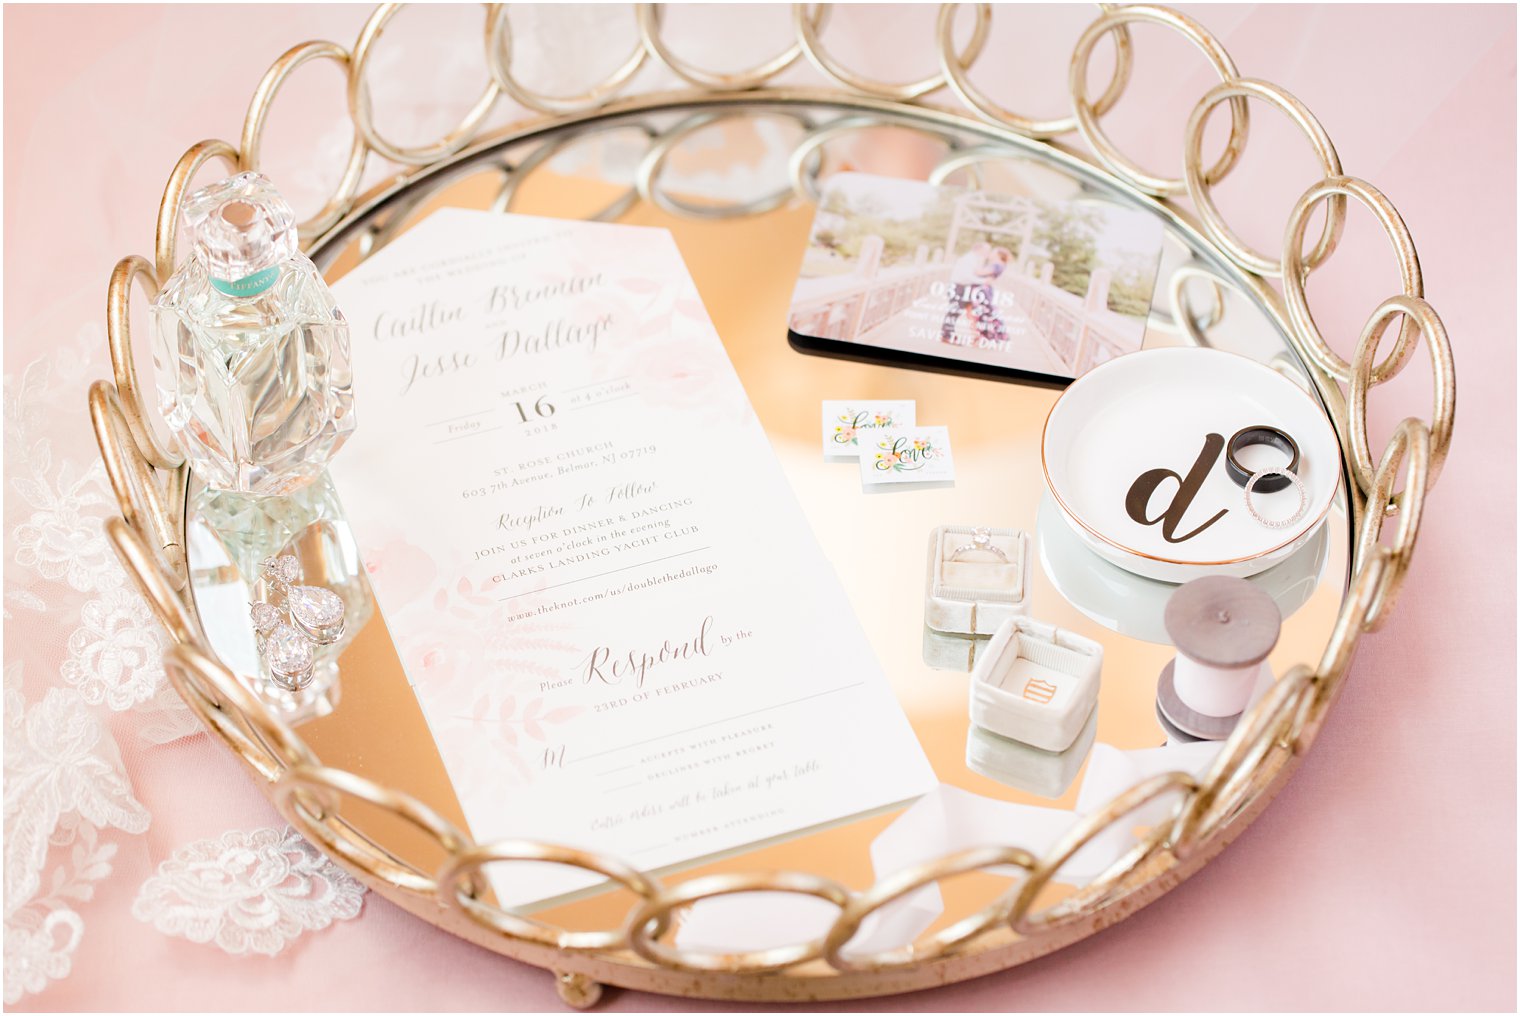 gold tray with invitation and bride's jewelry